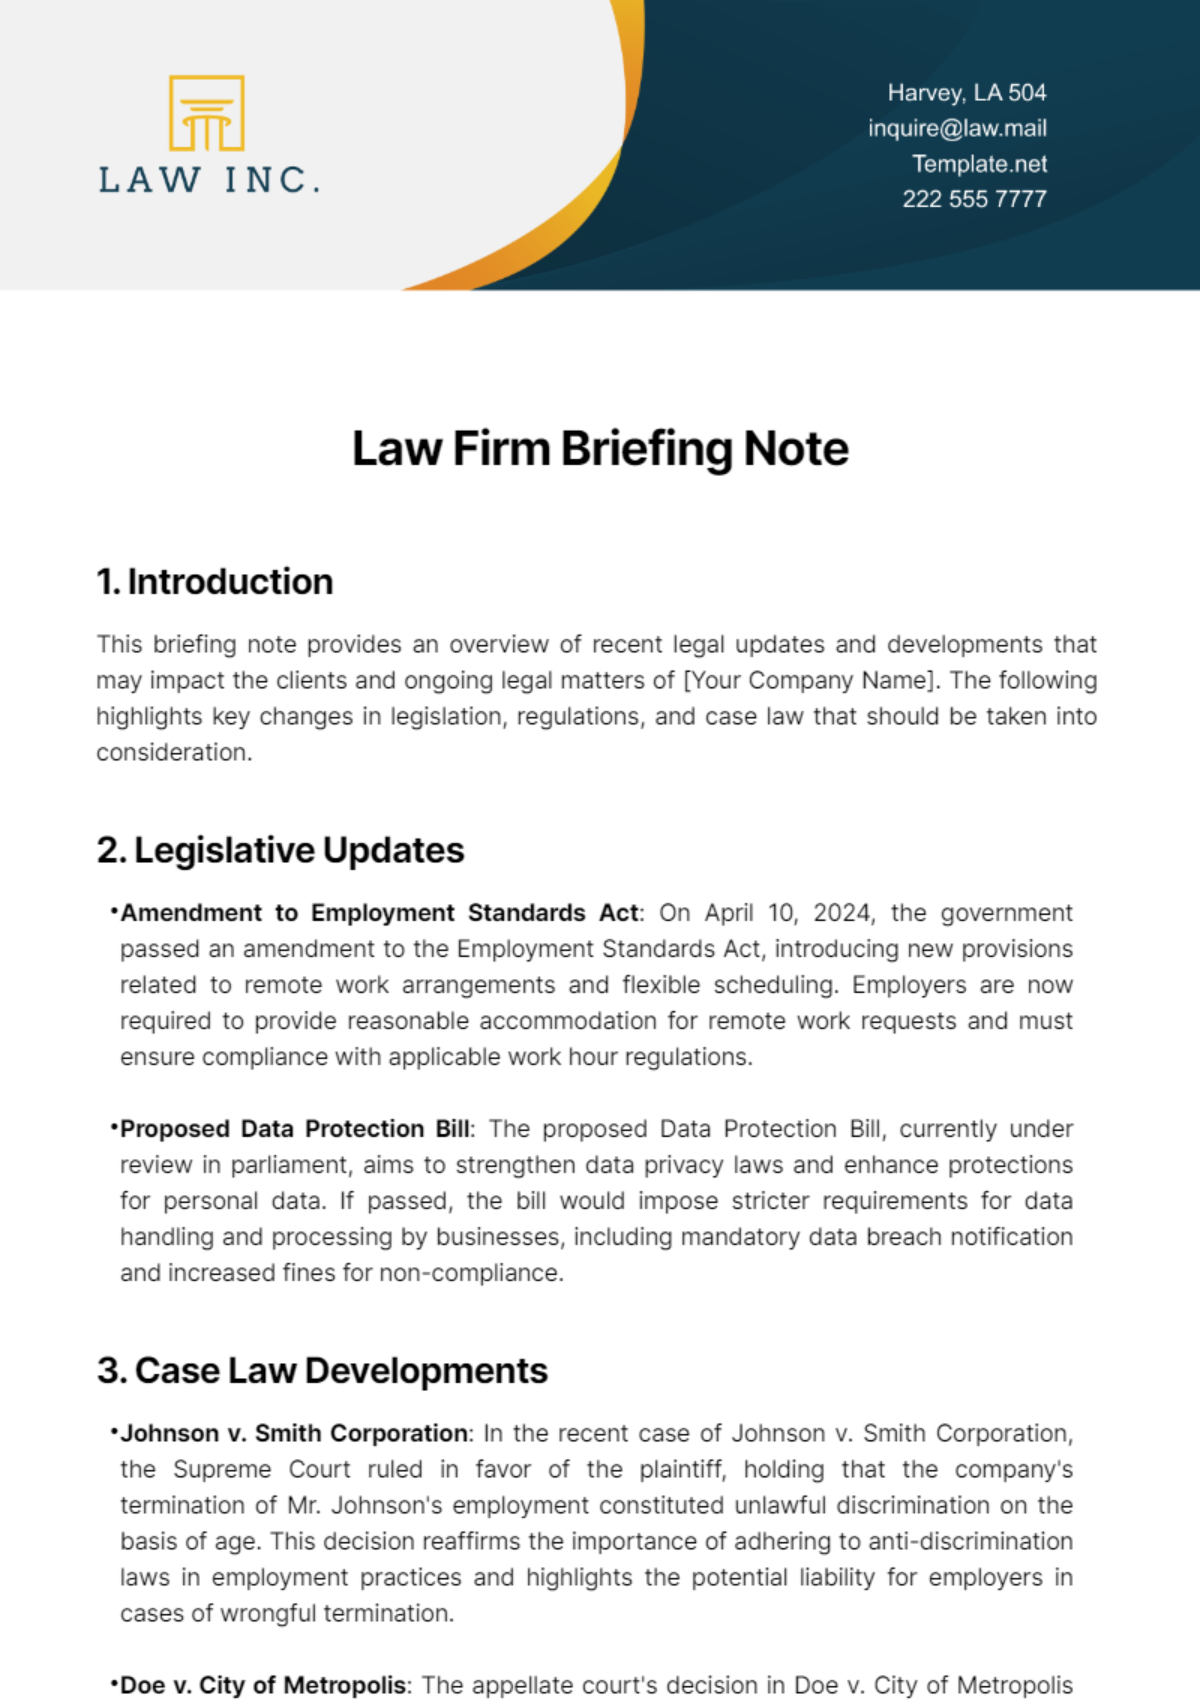 Law Firm Briefing Note Template